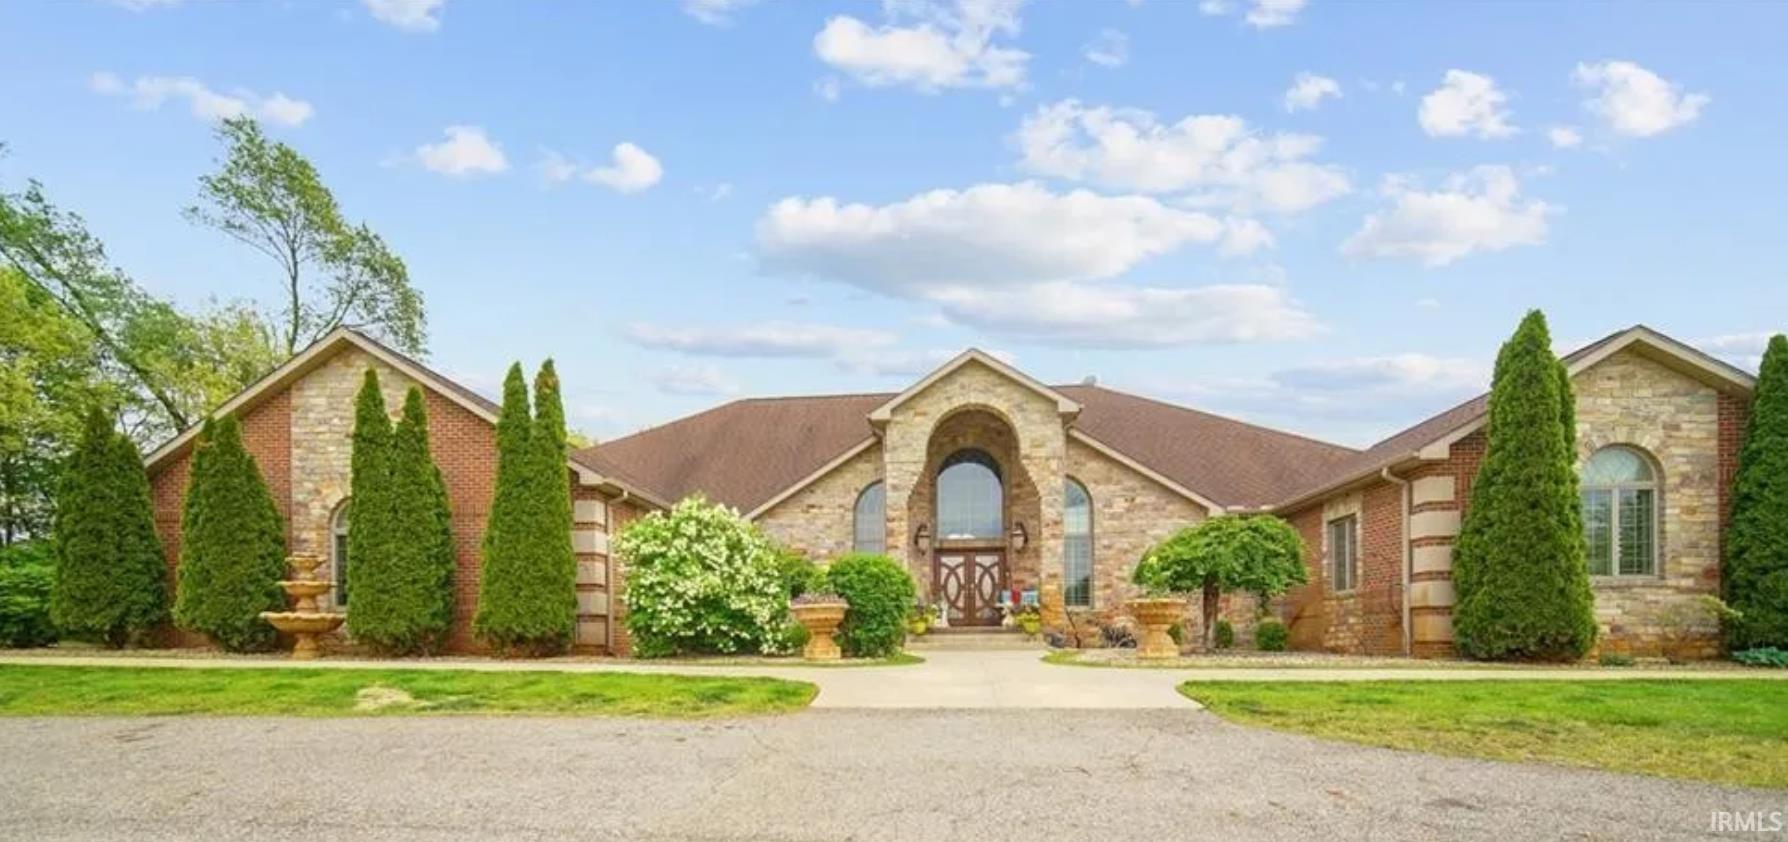 This beautiful 9,000sq/ft home sits on almost 33 acres. Enjoy nature as your drive back the 1/4 mile paved 2 lane driveway. This 5 bedroom 4 1/2 bath homes offers plenty of areas to entertain. The grand living room with exposed beams overlooks wet bar and pool with floor to ceiling windows. The gourmet kitchen with custom cabinets and walk-in pantry offers plenty of storage. The breakfast bar that seats 10, dining area, and family room make for a wonderful place to gather. There's an office on the main floor along with Master suite with private deck, spacious bathroom, walk in closet with washer & dryer. 2 additional bedrooms with one having it's own en suite. You can take the elevator or beautiful staircase to the ground level.  The ground floor offers 2 bedrooms, large walk in closets with Jack & Jill bathroom.  Game room, gym, movie theater, wet bar area also on ground level. Step outside to your own sanctuary.  The in-ground salt water pool with automatic pool cover, pool house, outdoor kitchen, and firepit.  This property offers a 2,000sqft guest house with 3 bedrooms 1 bath with attached 5,000sqft pole barn. House generator, 1 acre pond stocked with bass and blue gill allows you to enjoy nature at its finest.